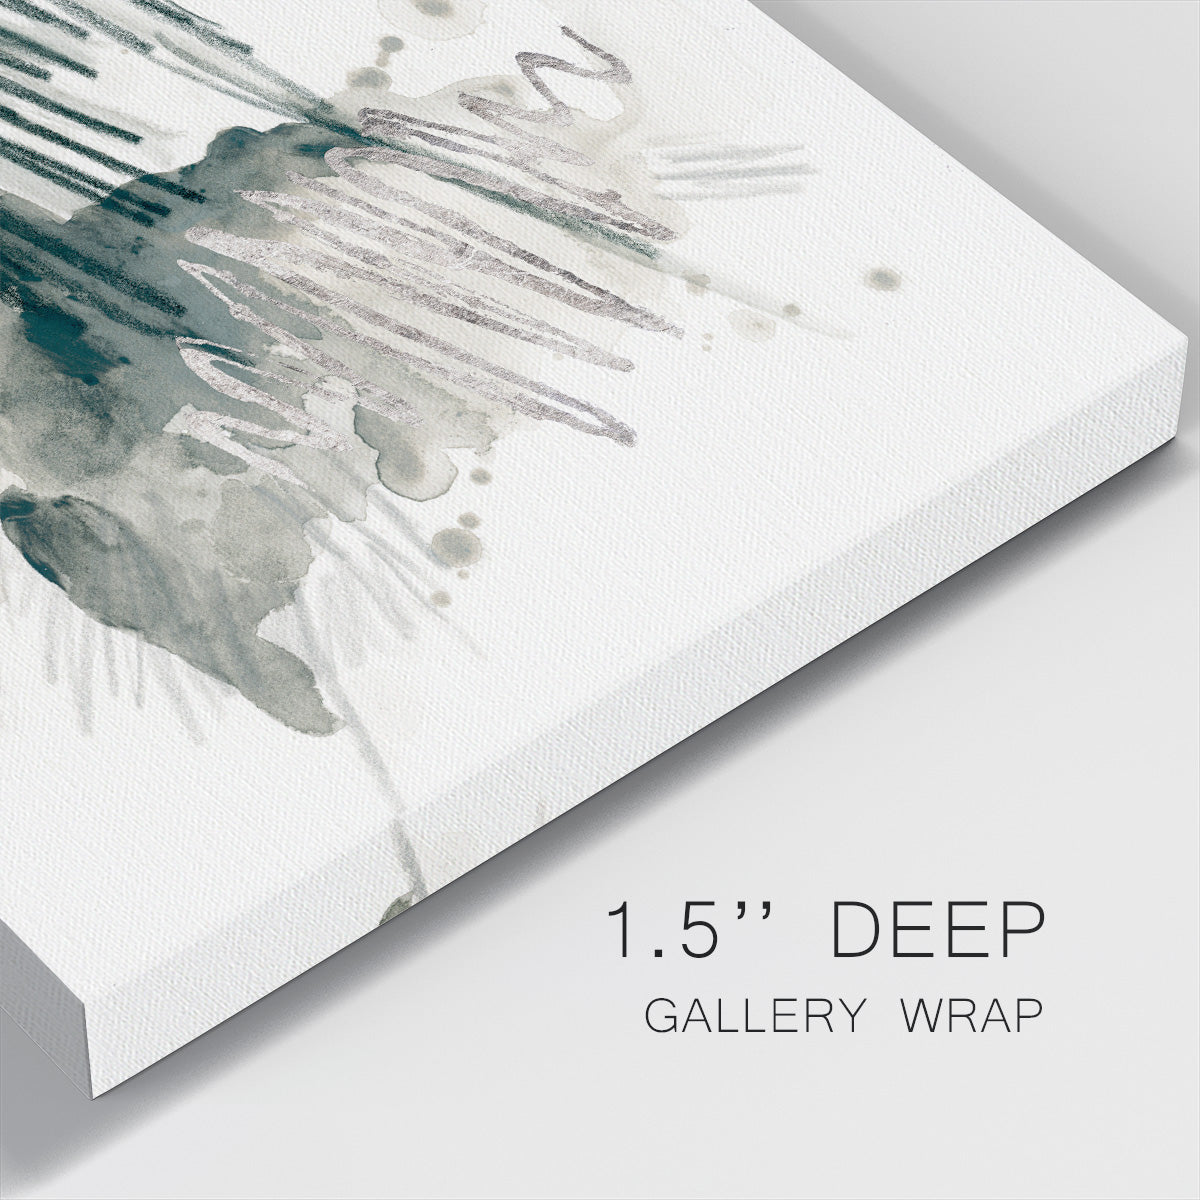 Graphite Markup I-Premium Gallery Wrapped Canvas - Ready to Hang